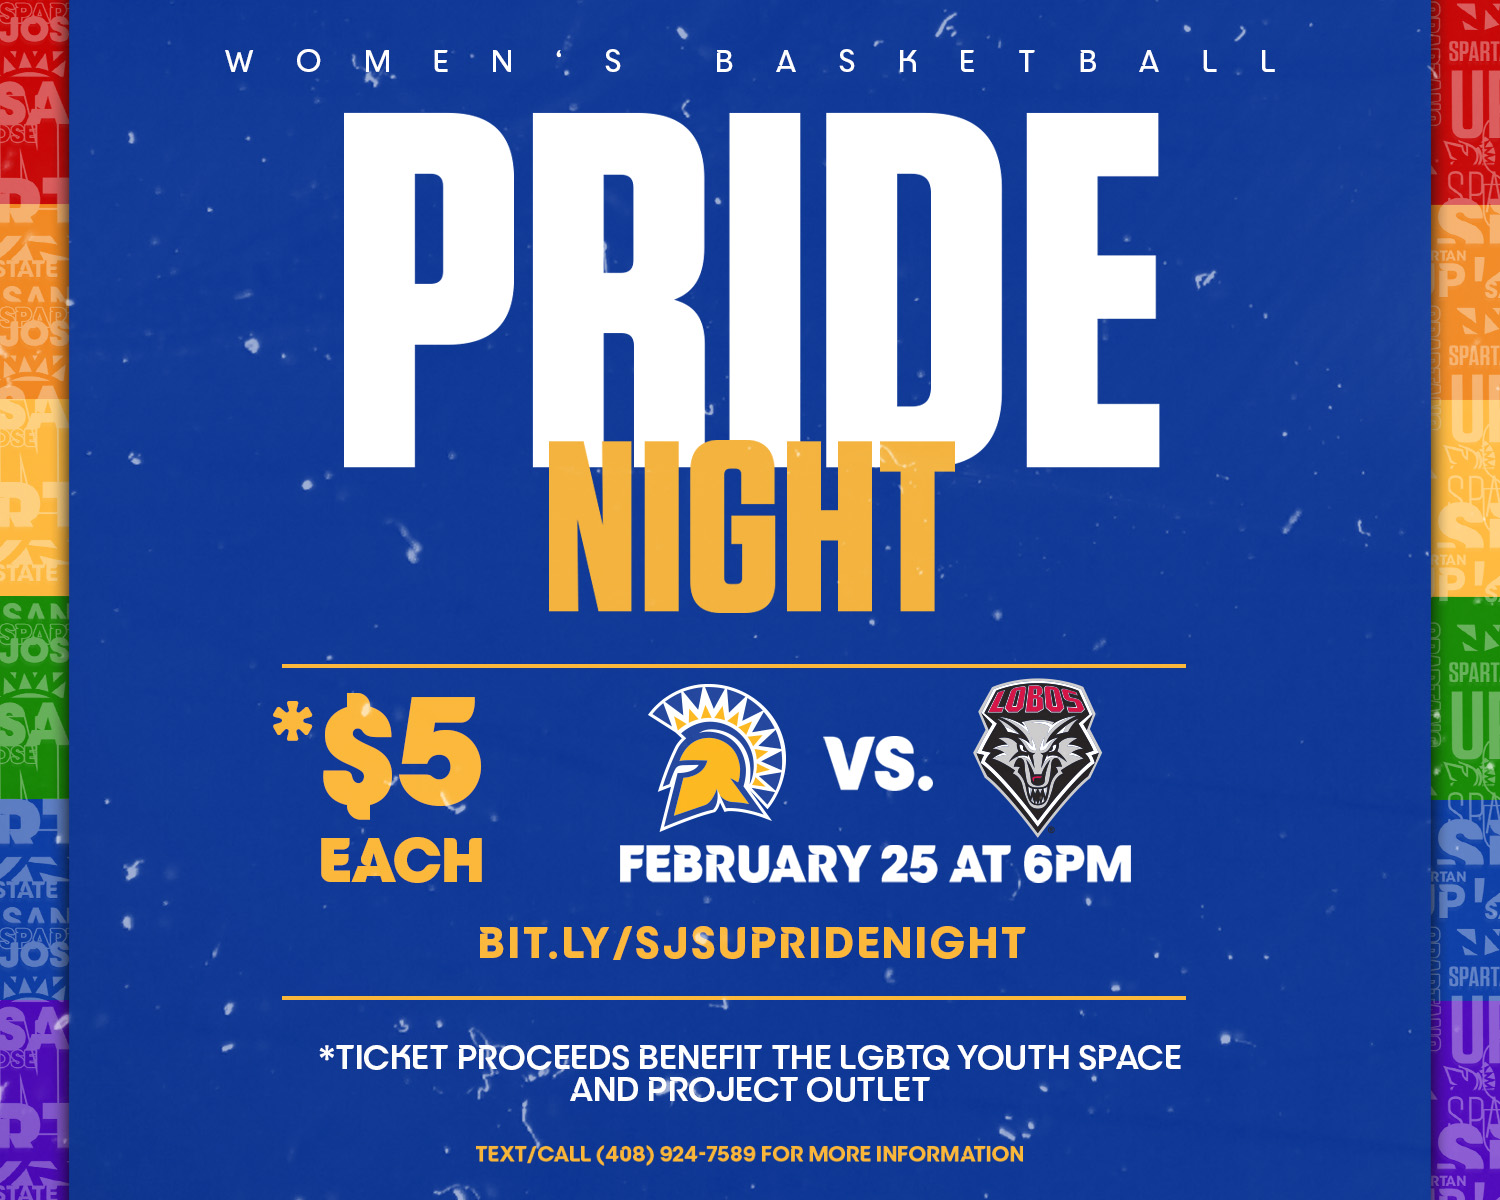 SJSU PRIDE Night text, with blue background and rainbow bars on the sides